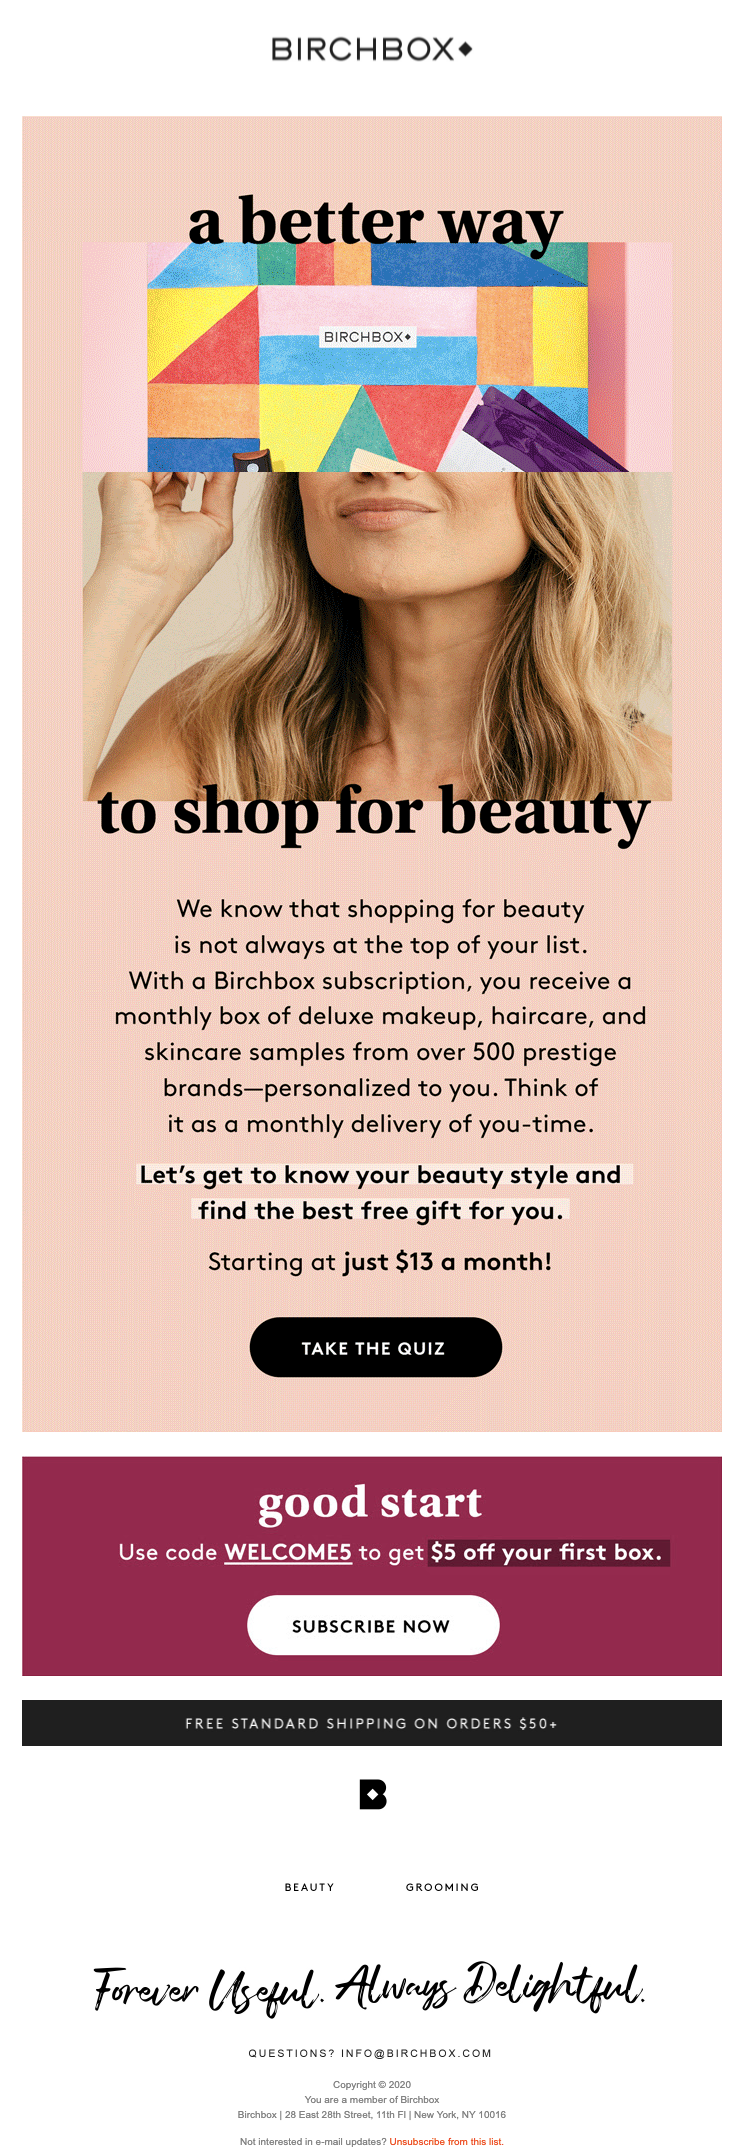 welcome email example from birchbox